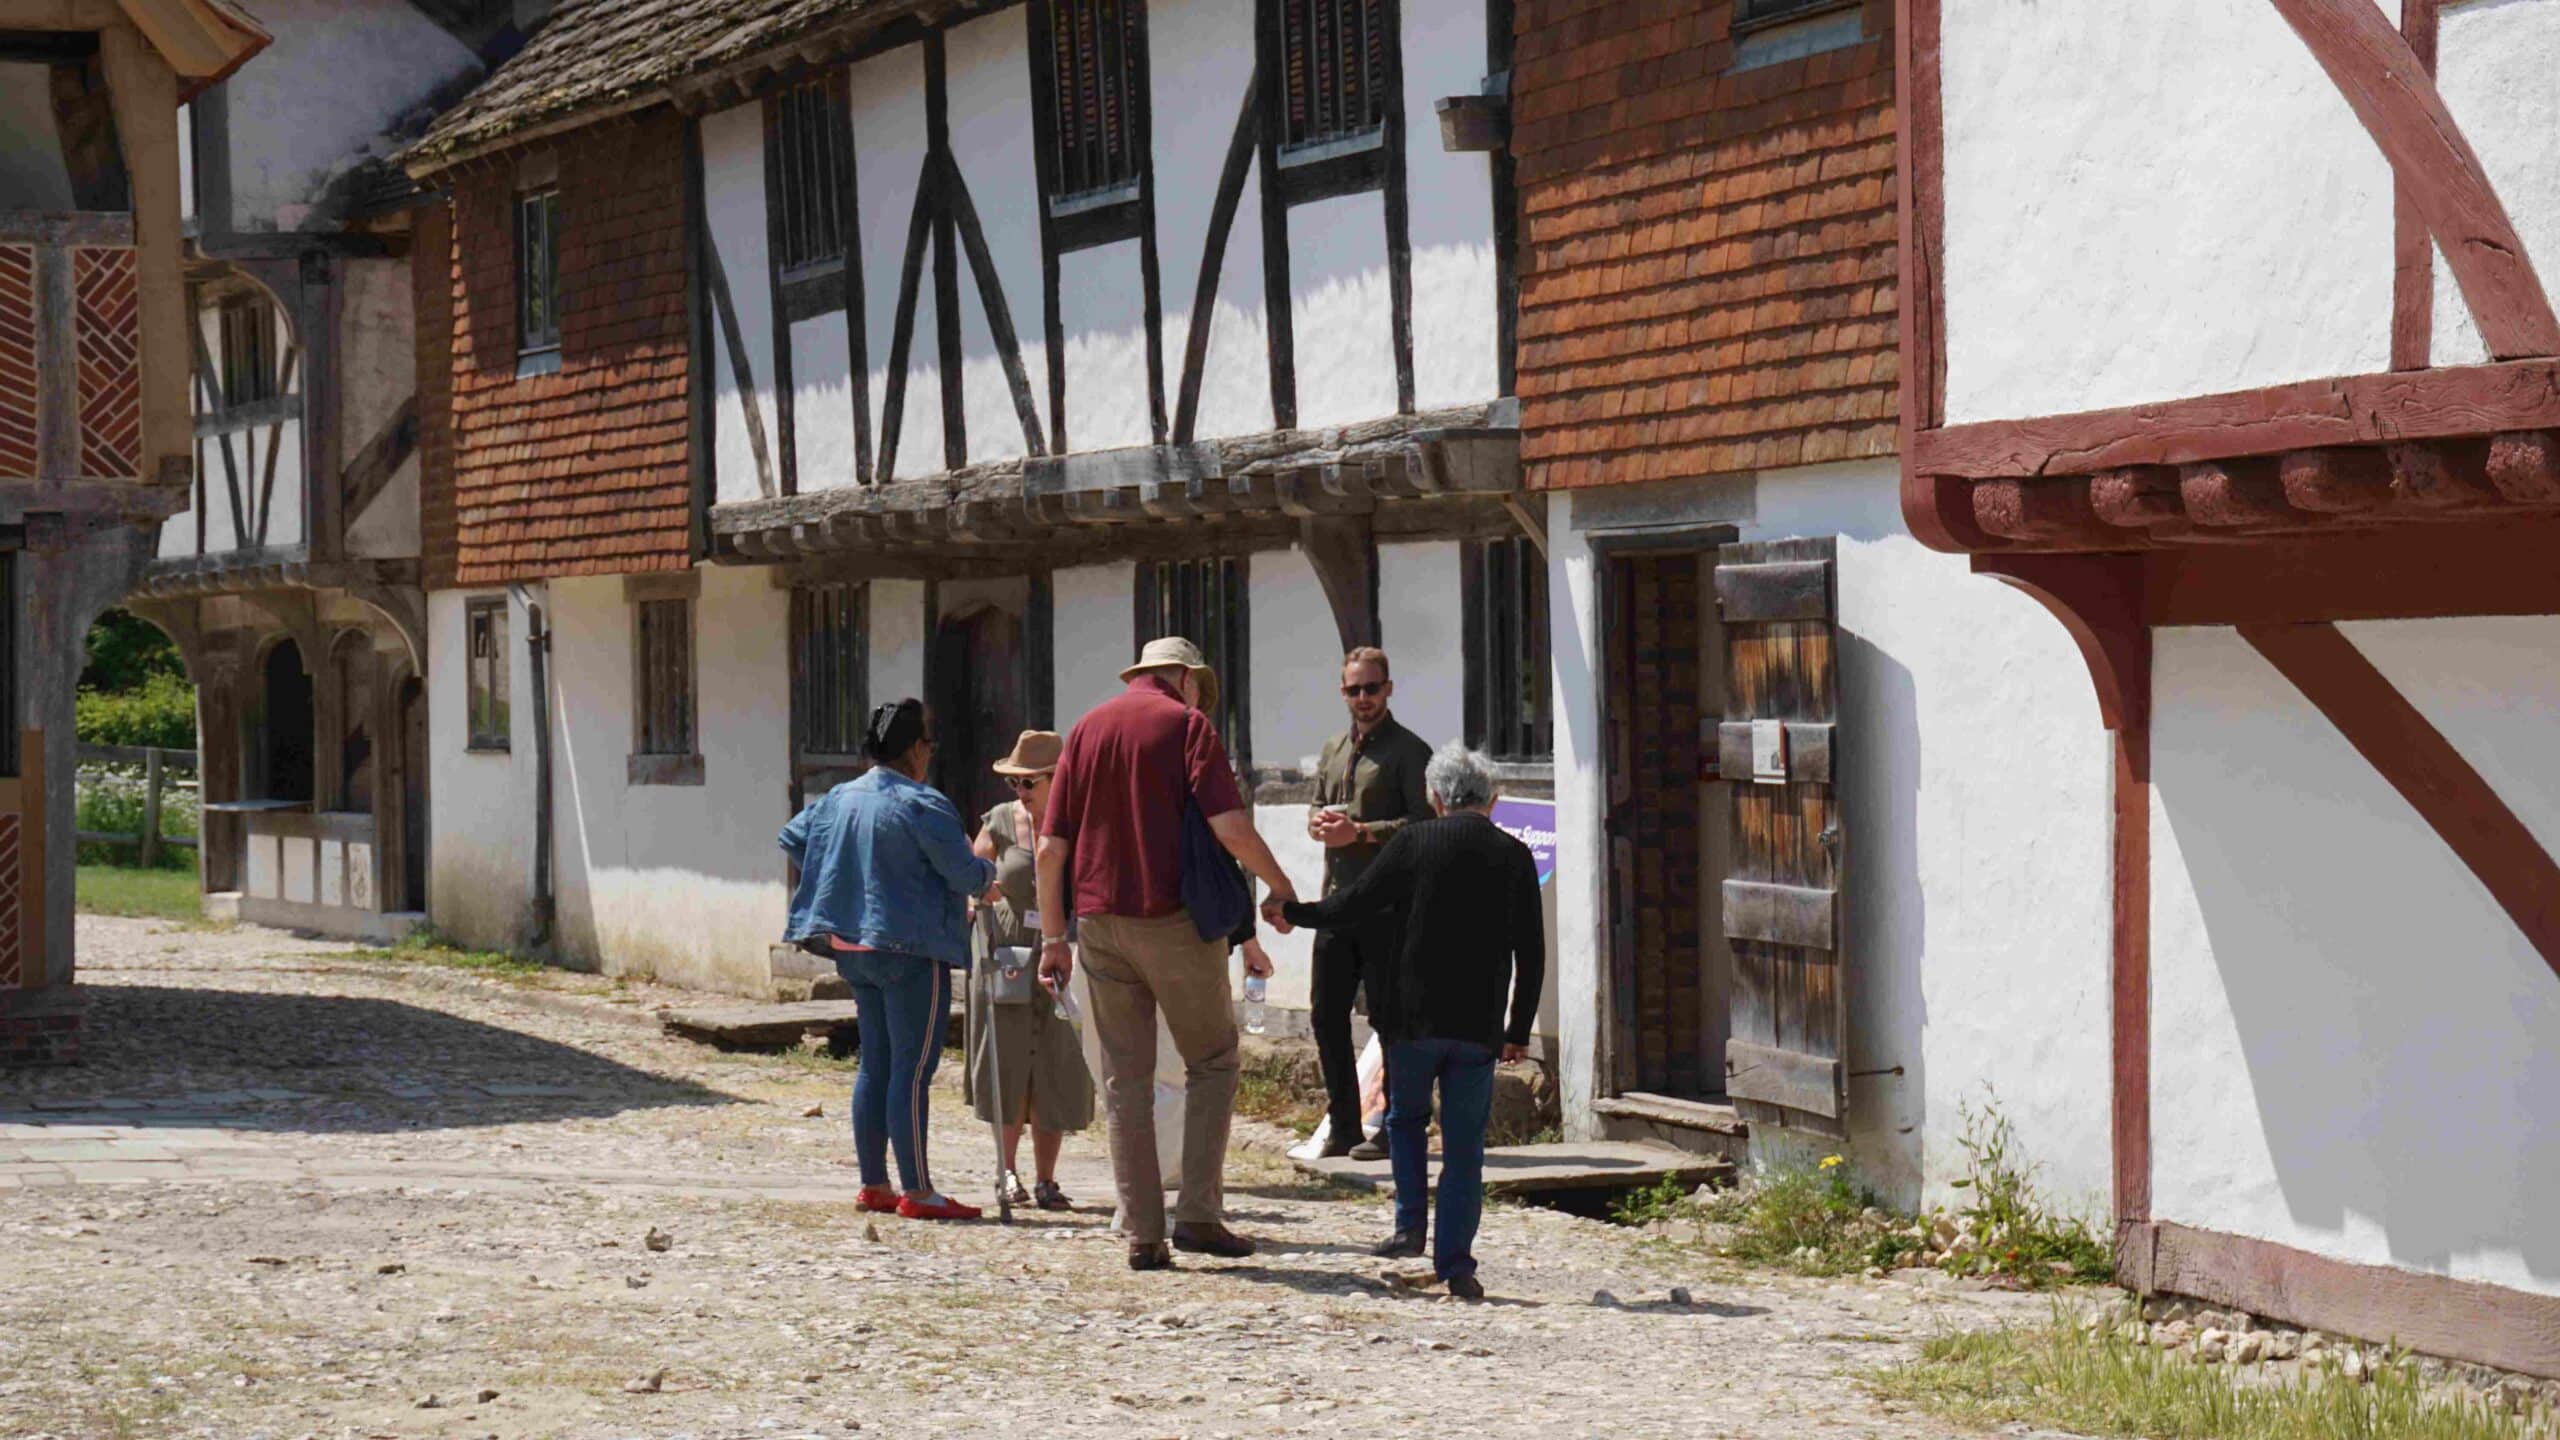 Elderly people with carers being shown around tudor buildings